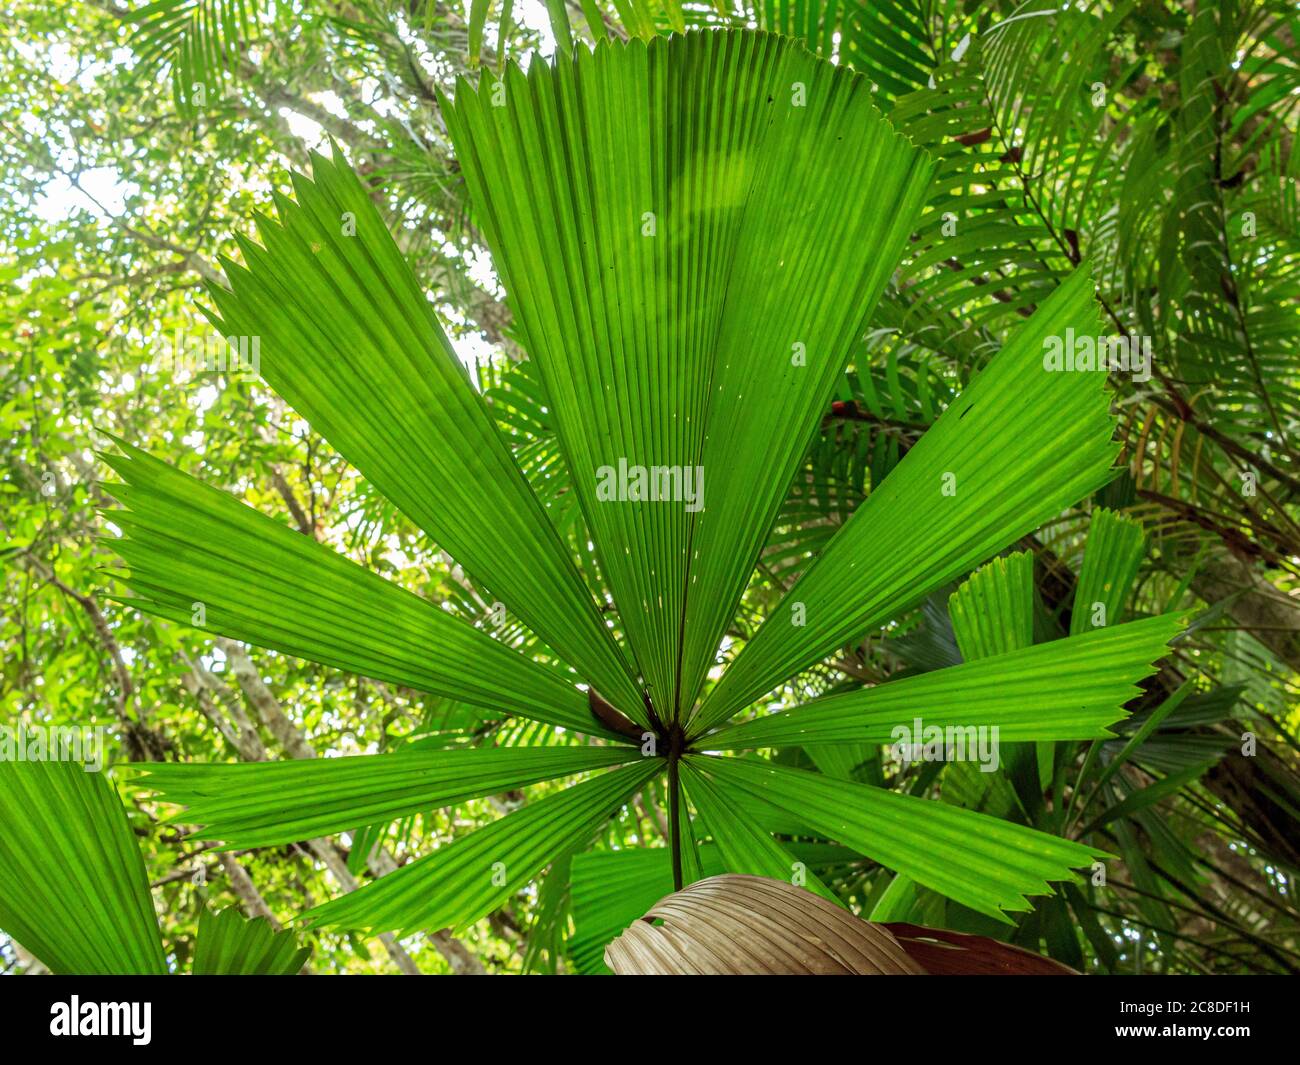 Large green leafs in palm trees jungle simple picture Stock Photo